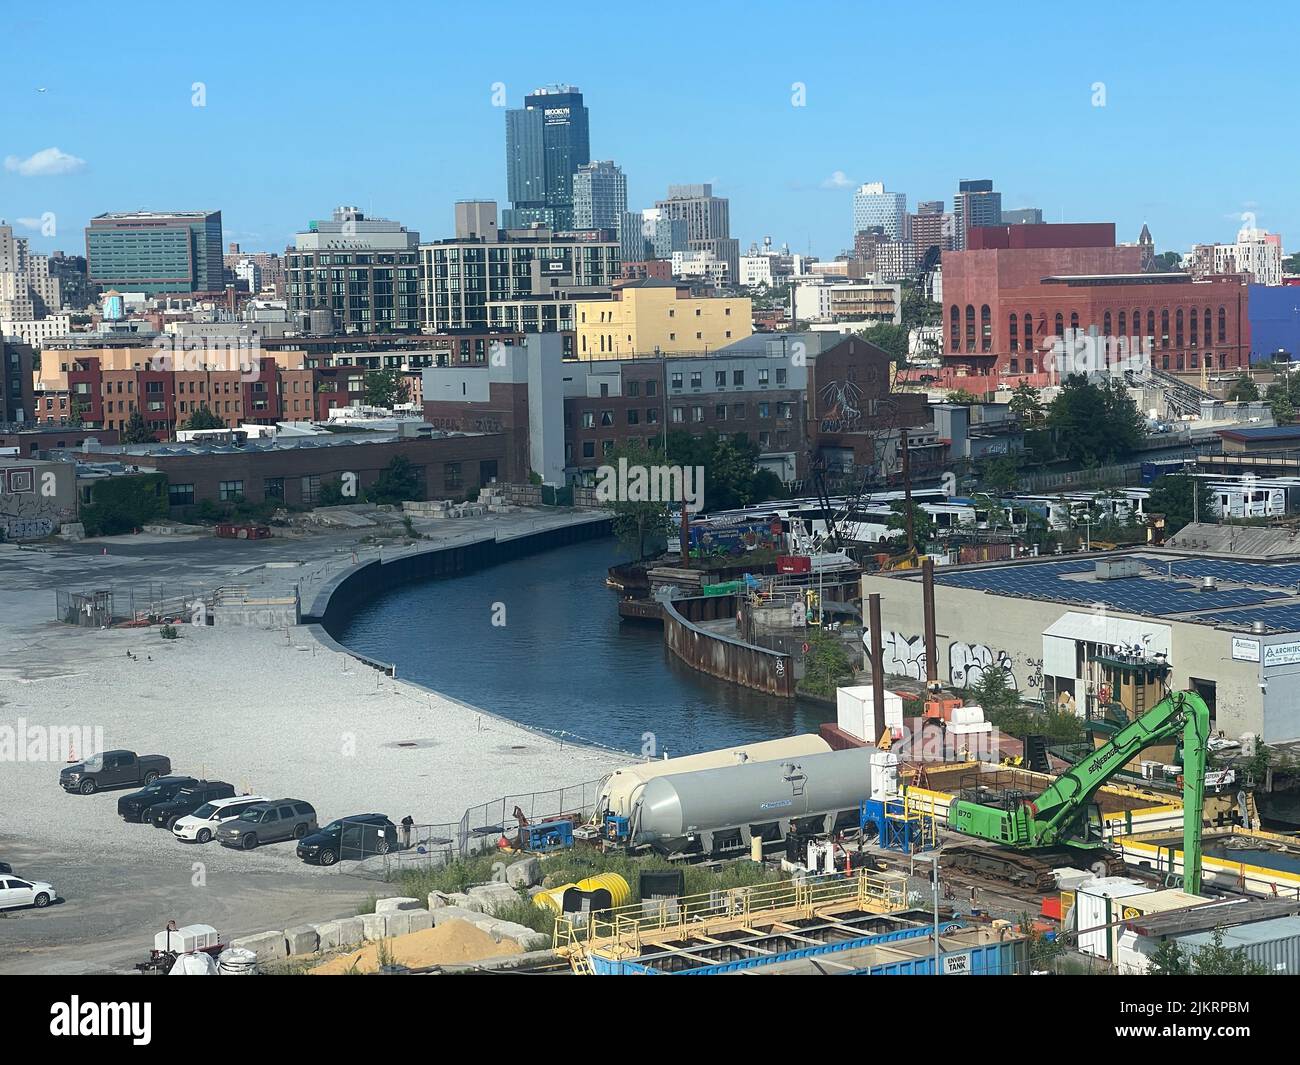 Gowanus Canal industrial neighborhood with still growing commercial and residential Brooklyn obvious in the background. Stock Photo